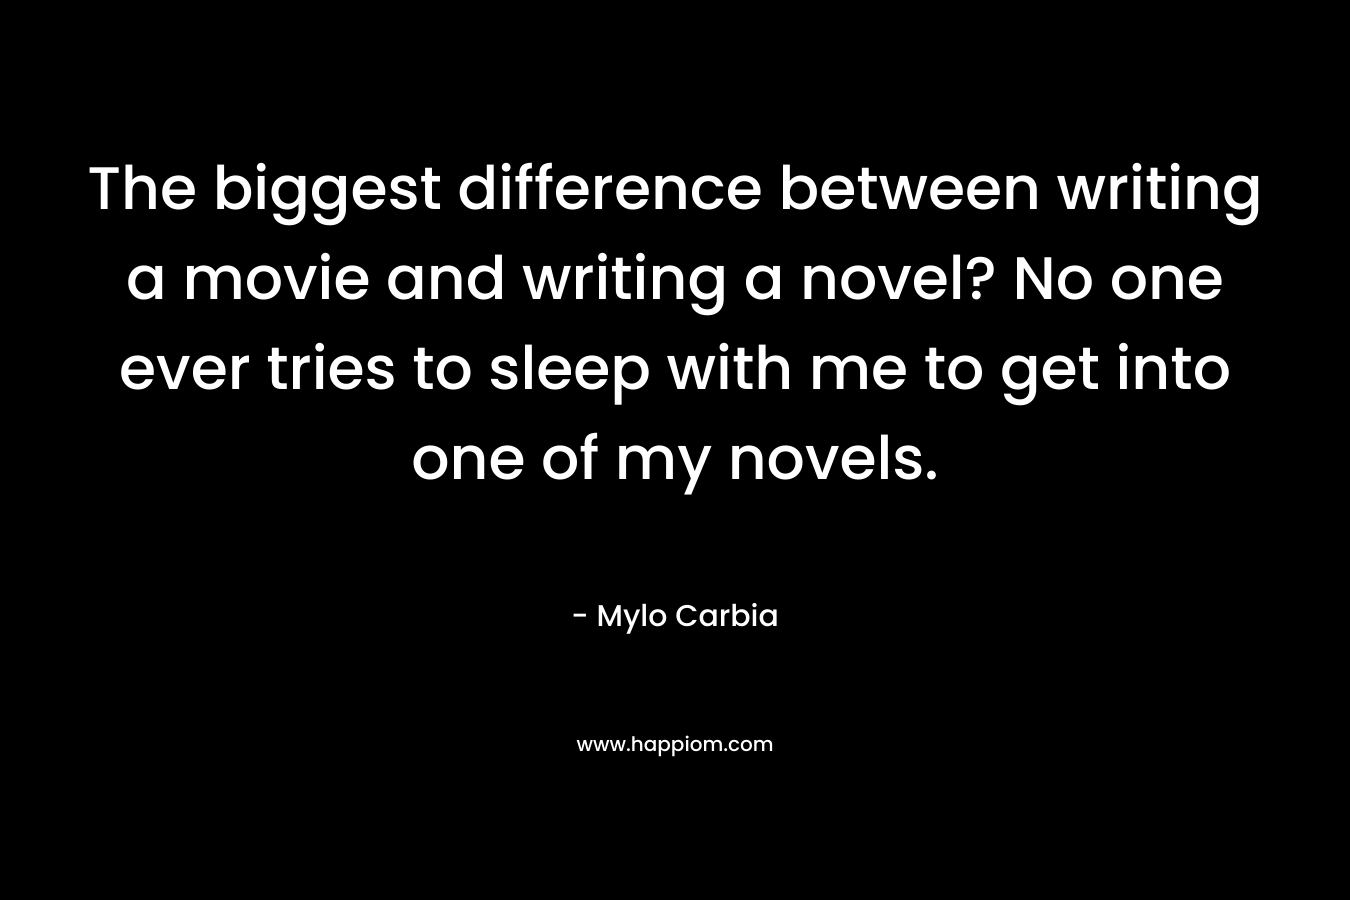 The biggest difference between writing a movie and writing a novel? No one ever tries to sleep with me to get into one of my novels. – Mylo Carbia